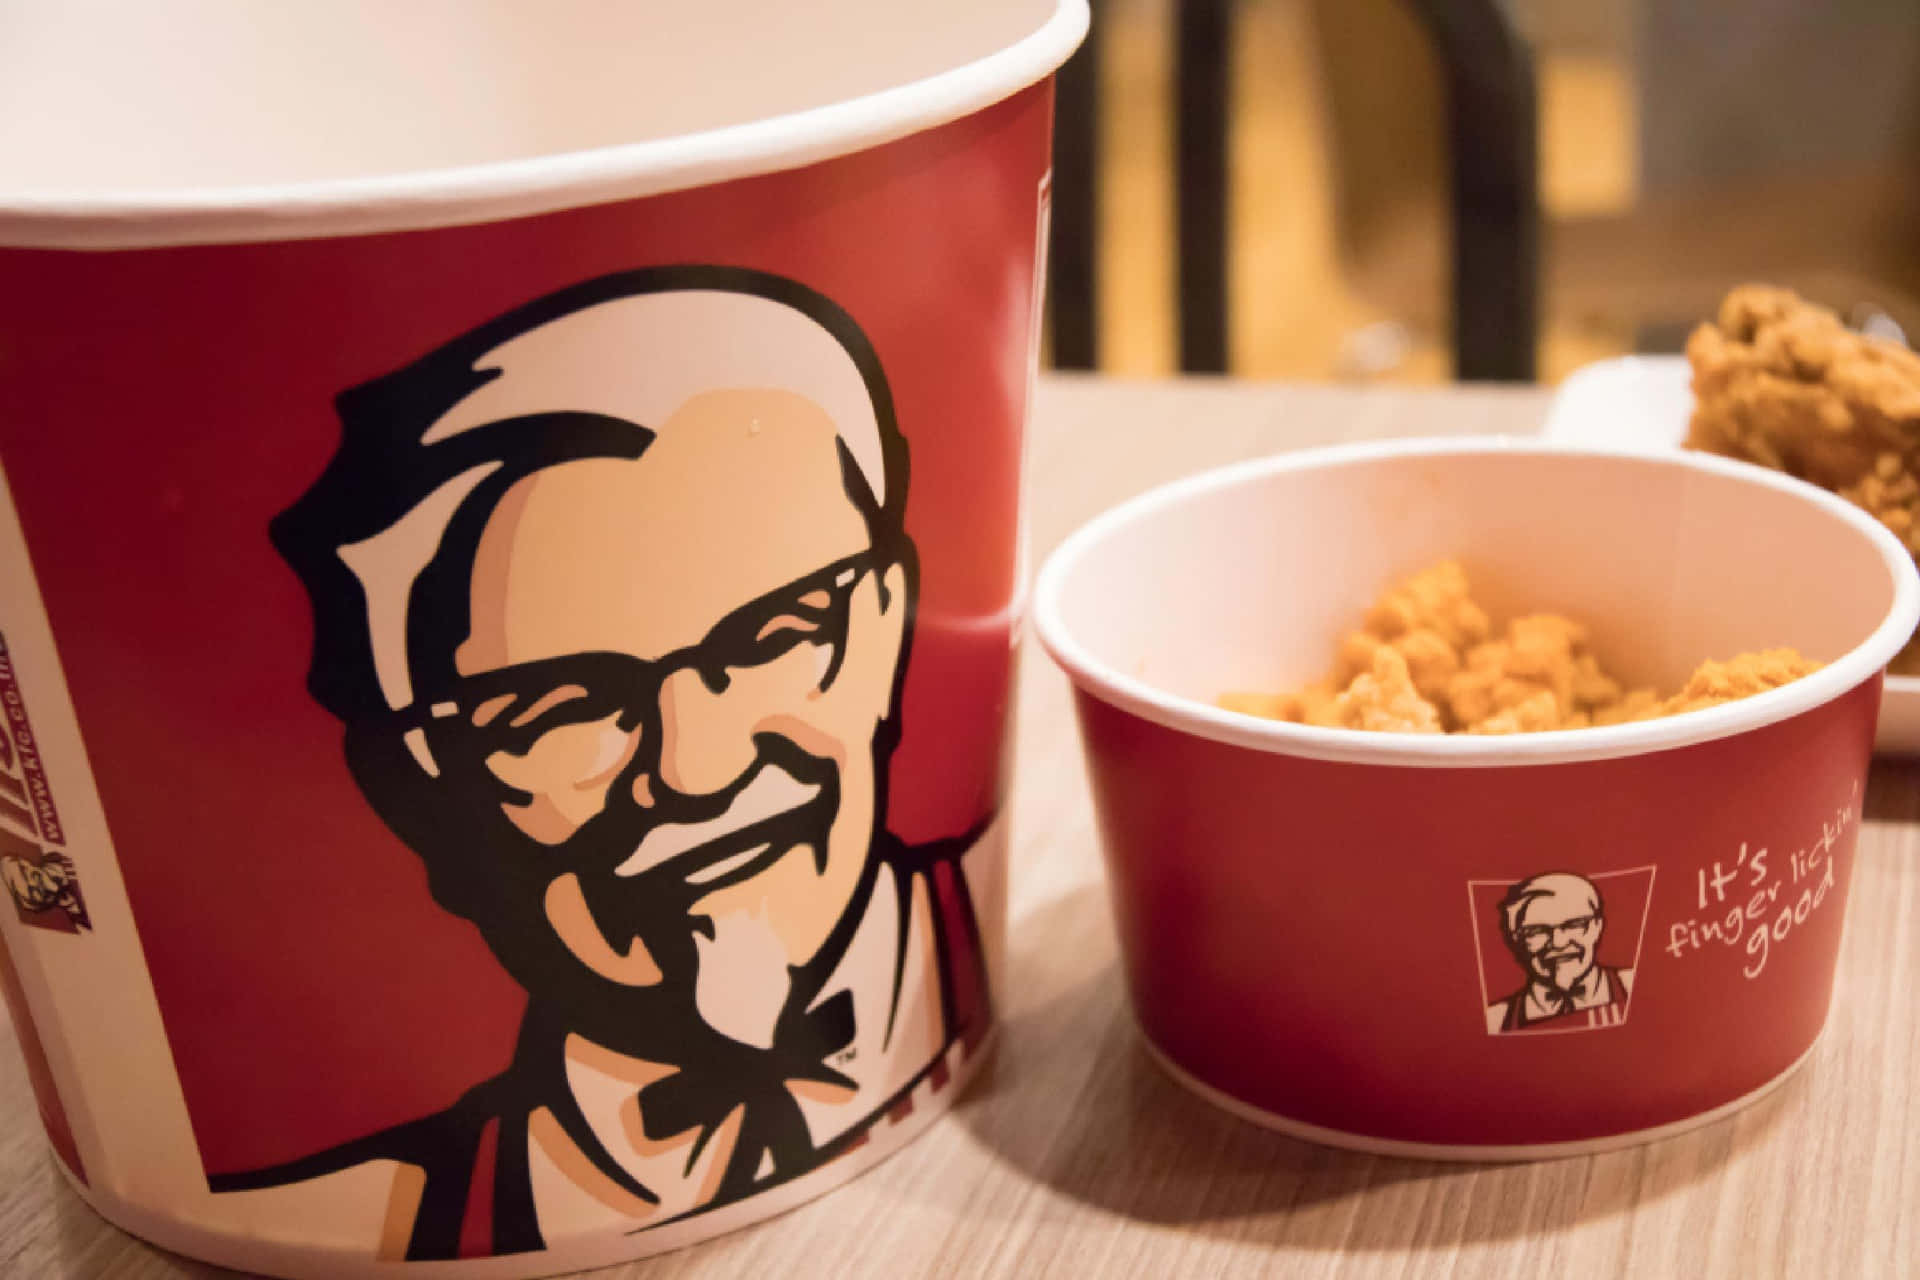 Explore Finger-Licking Deliciousness at KFC